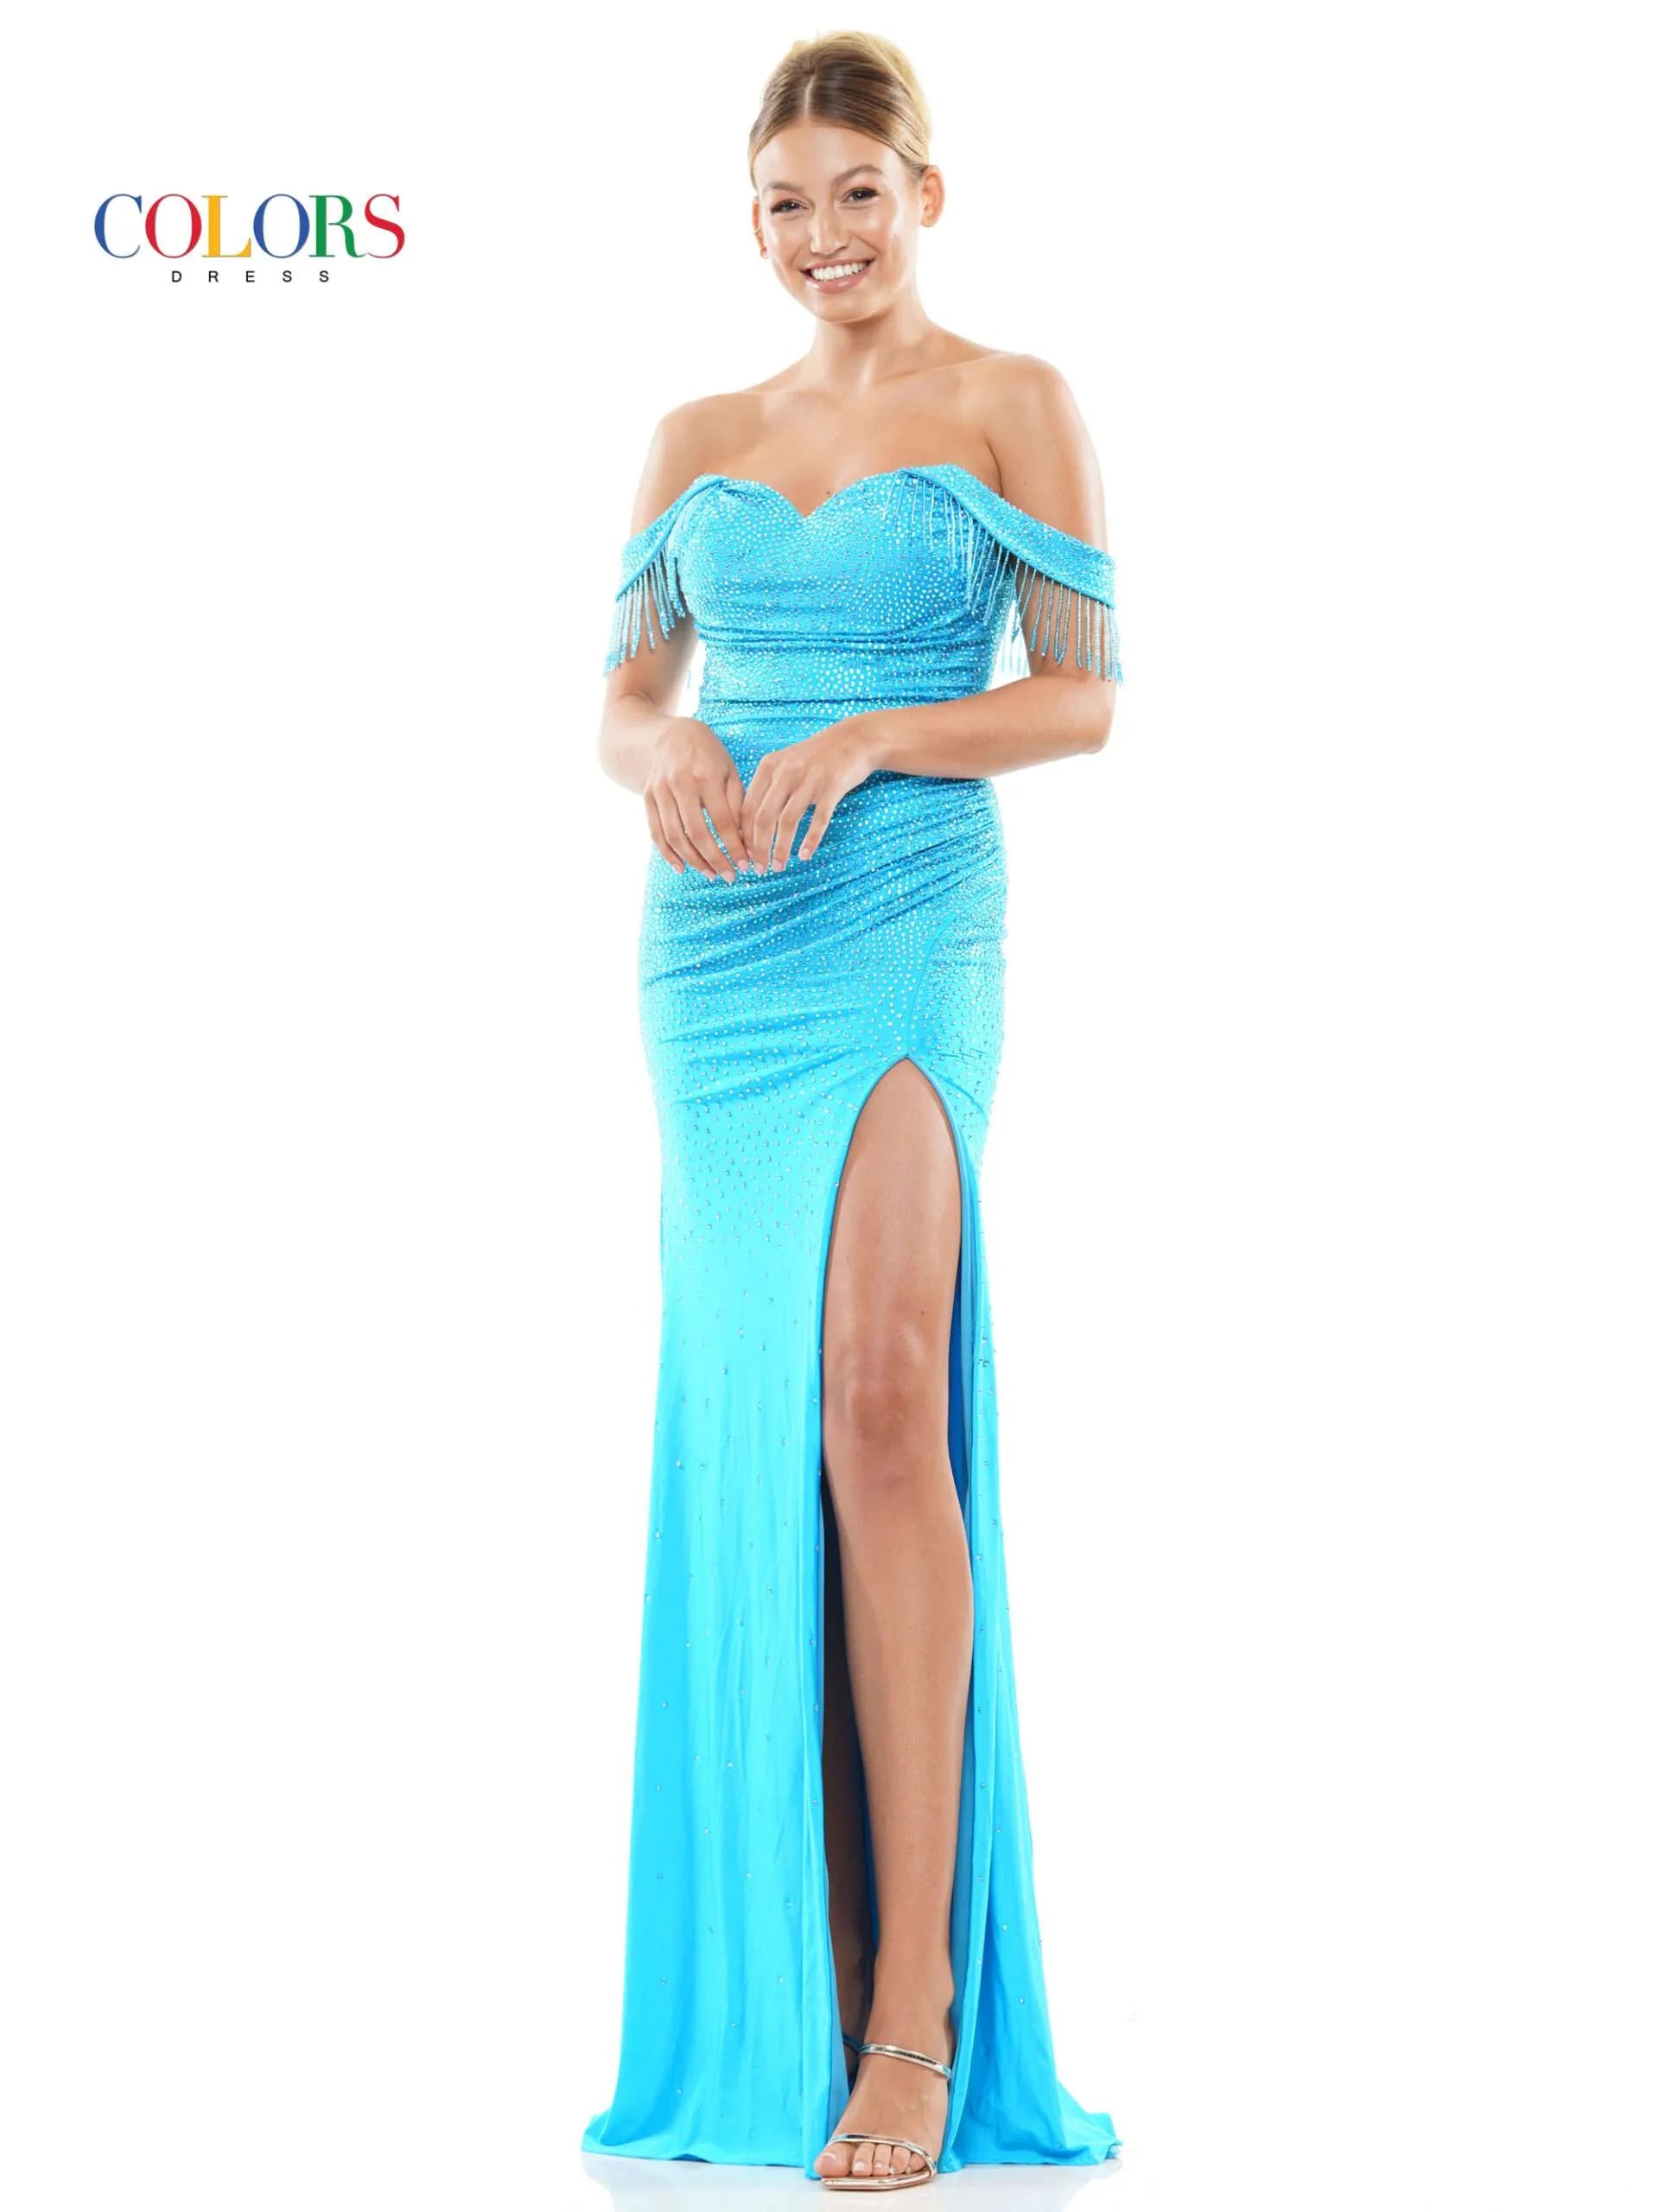 This glamorous formal dress from Colors Dress 3288 features off the shoulder fringe tassel sleeves, a crystal-studded bodice,  slit skirt, and a ruched waist detailing for a timeless and elegant look. Perfect for proms and special occasions.  Sizes: 0-22  Colors: Black, Deep Green, Turquoise